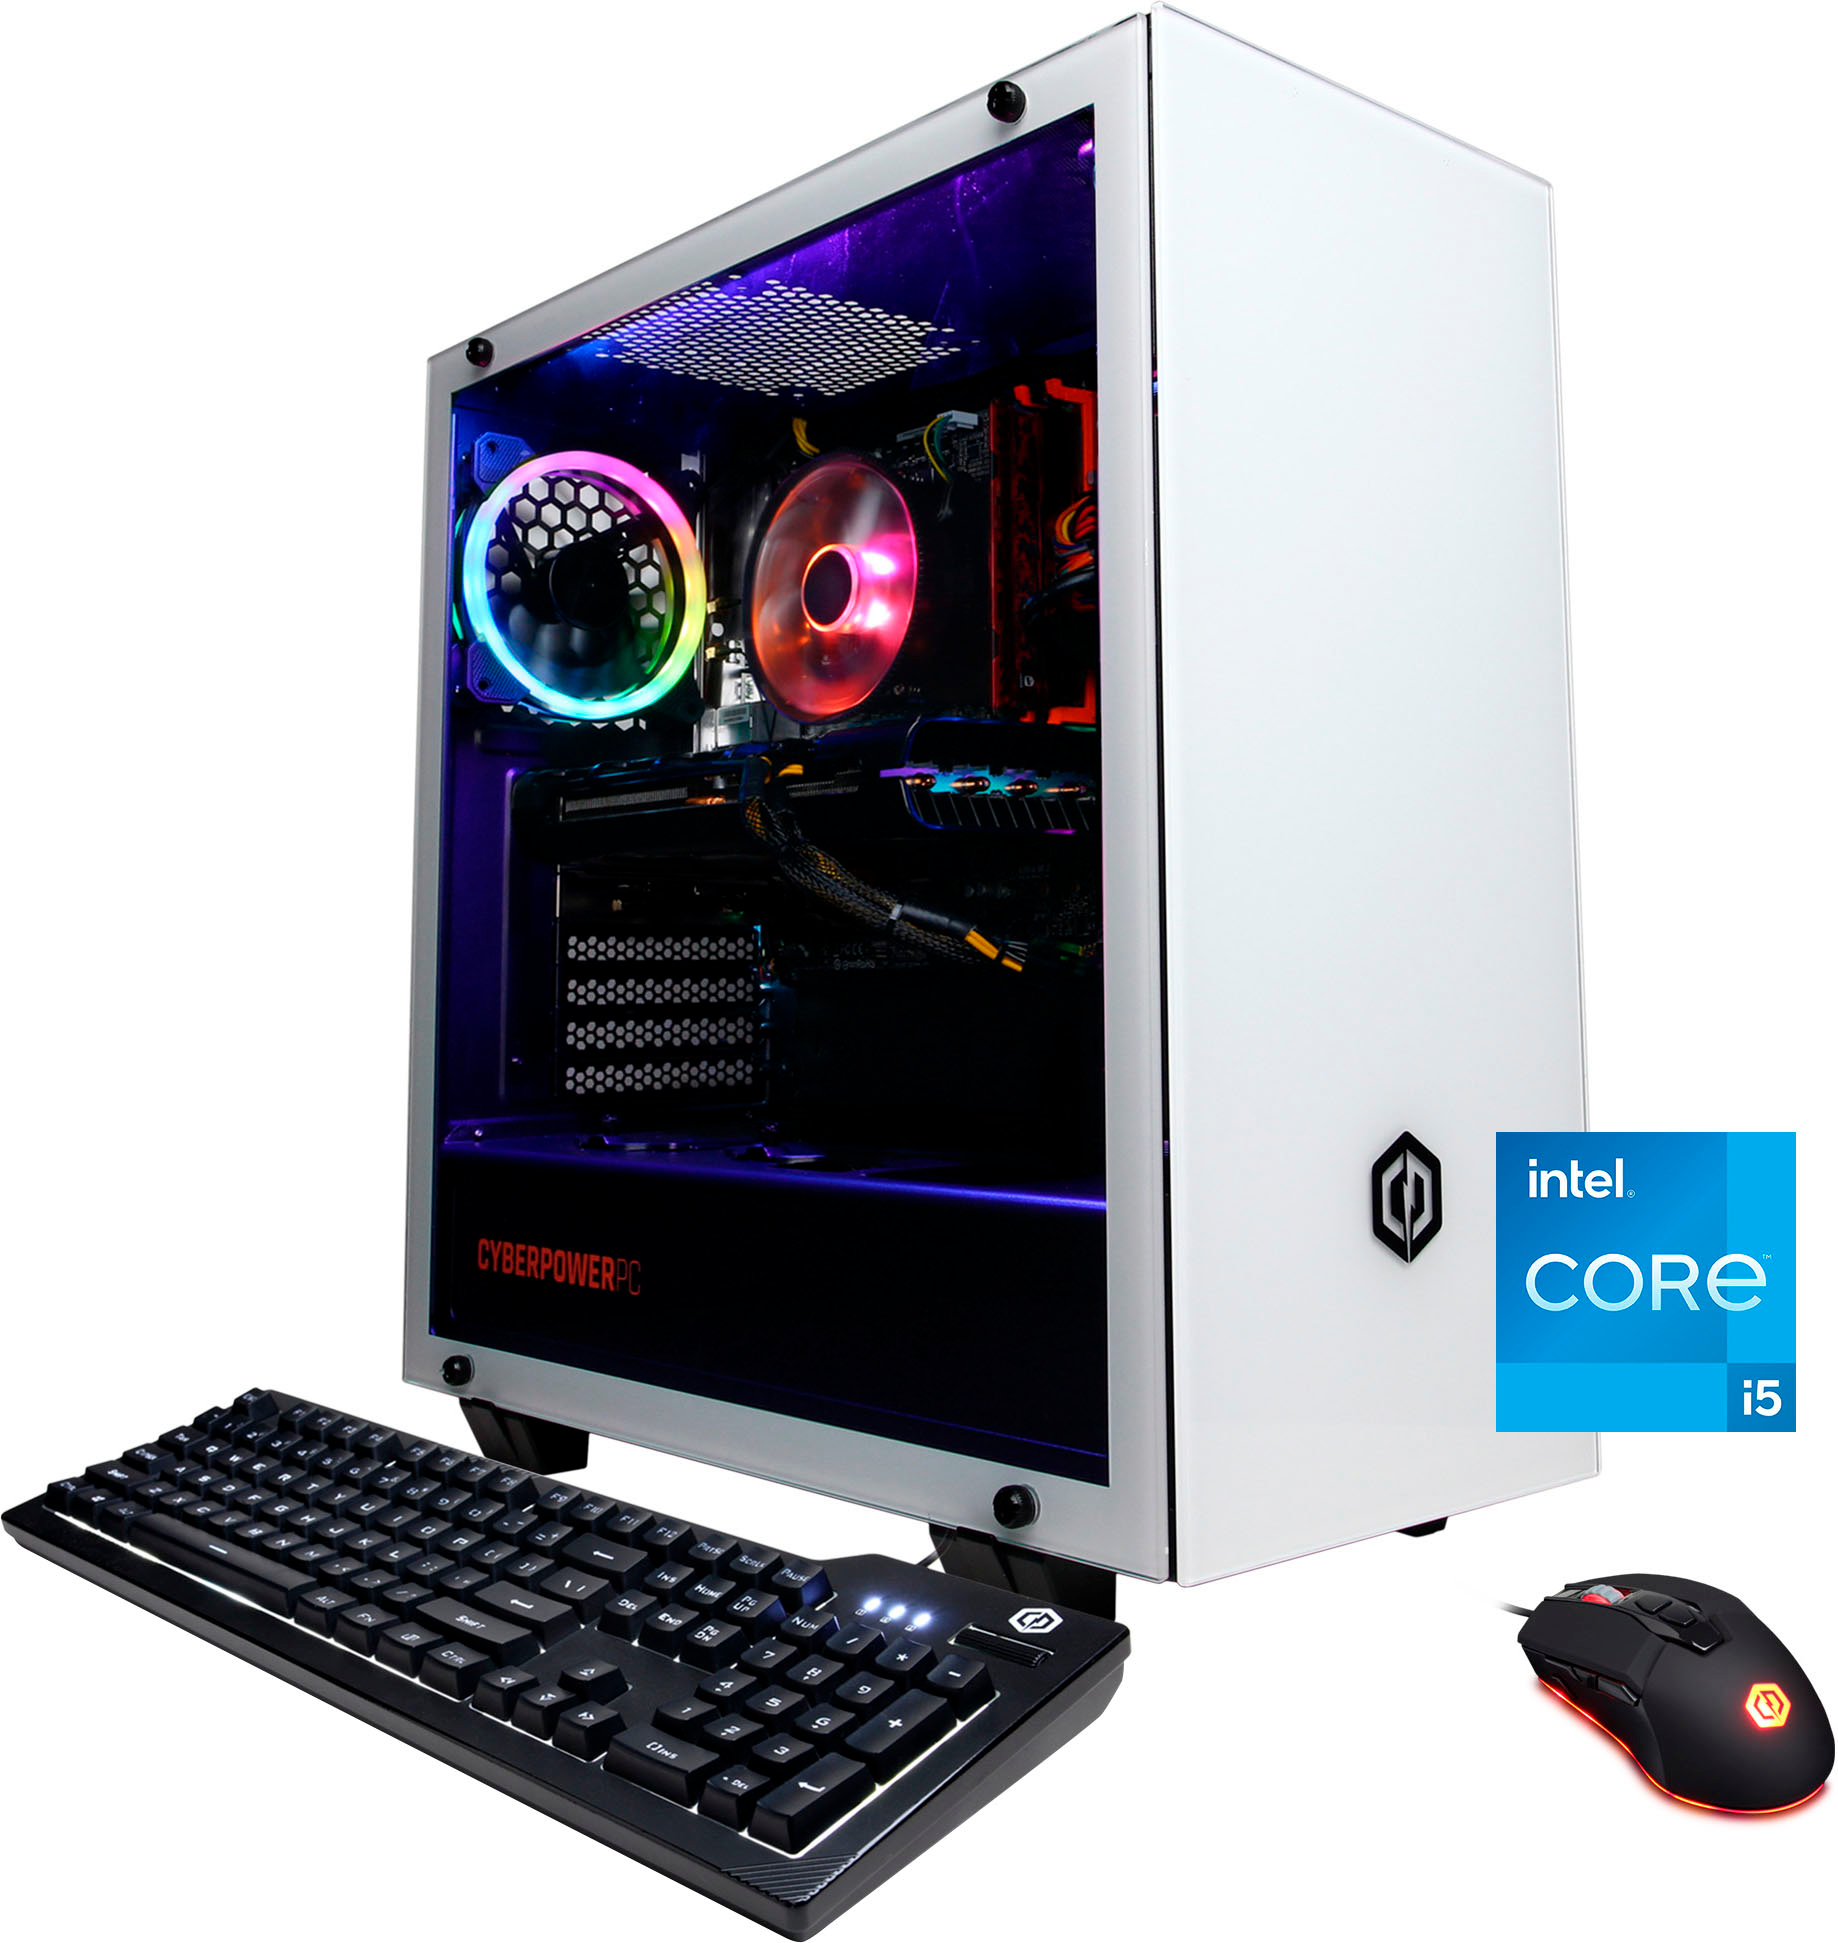 PC Games to Be Released this Week - CyberPowerPC